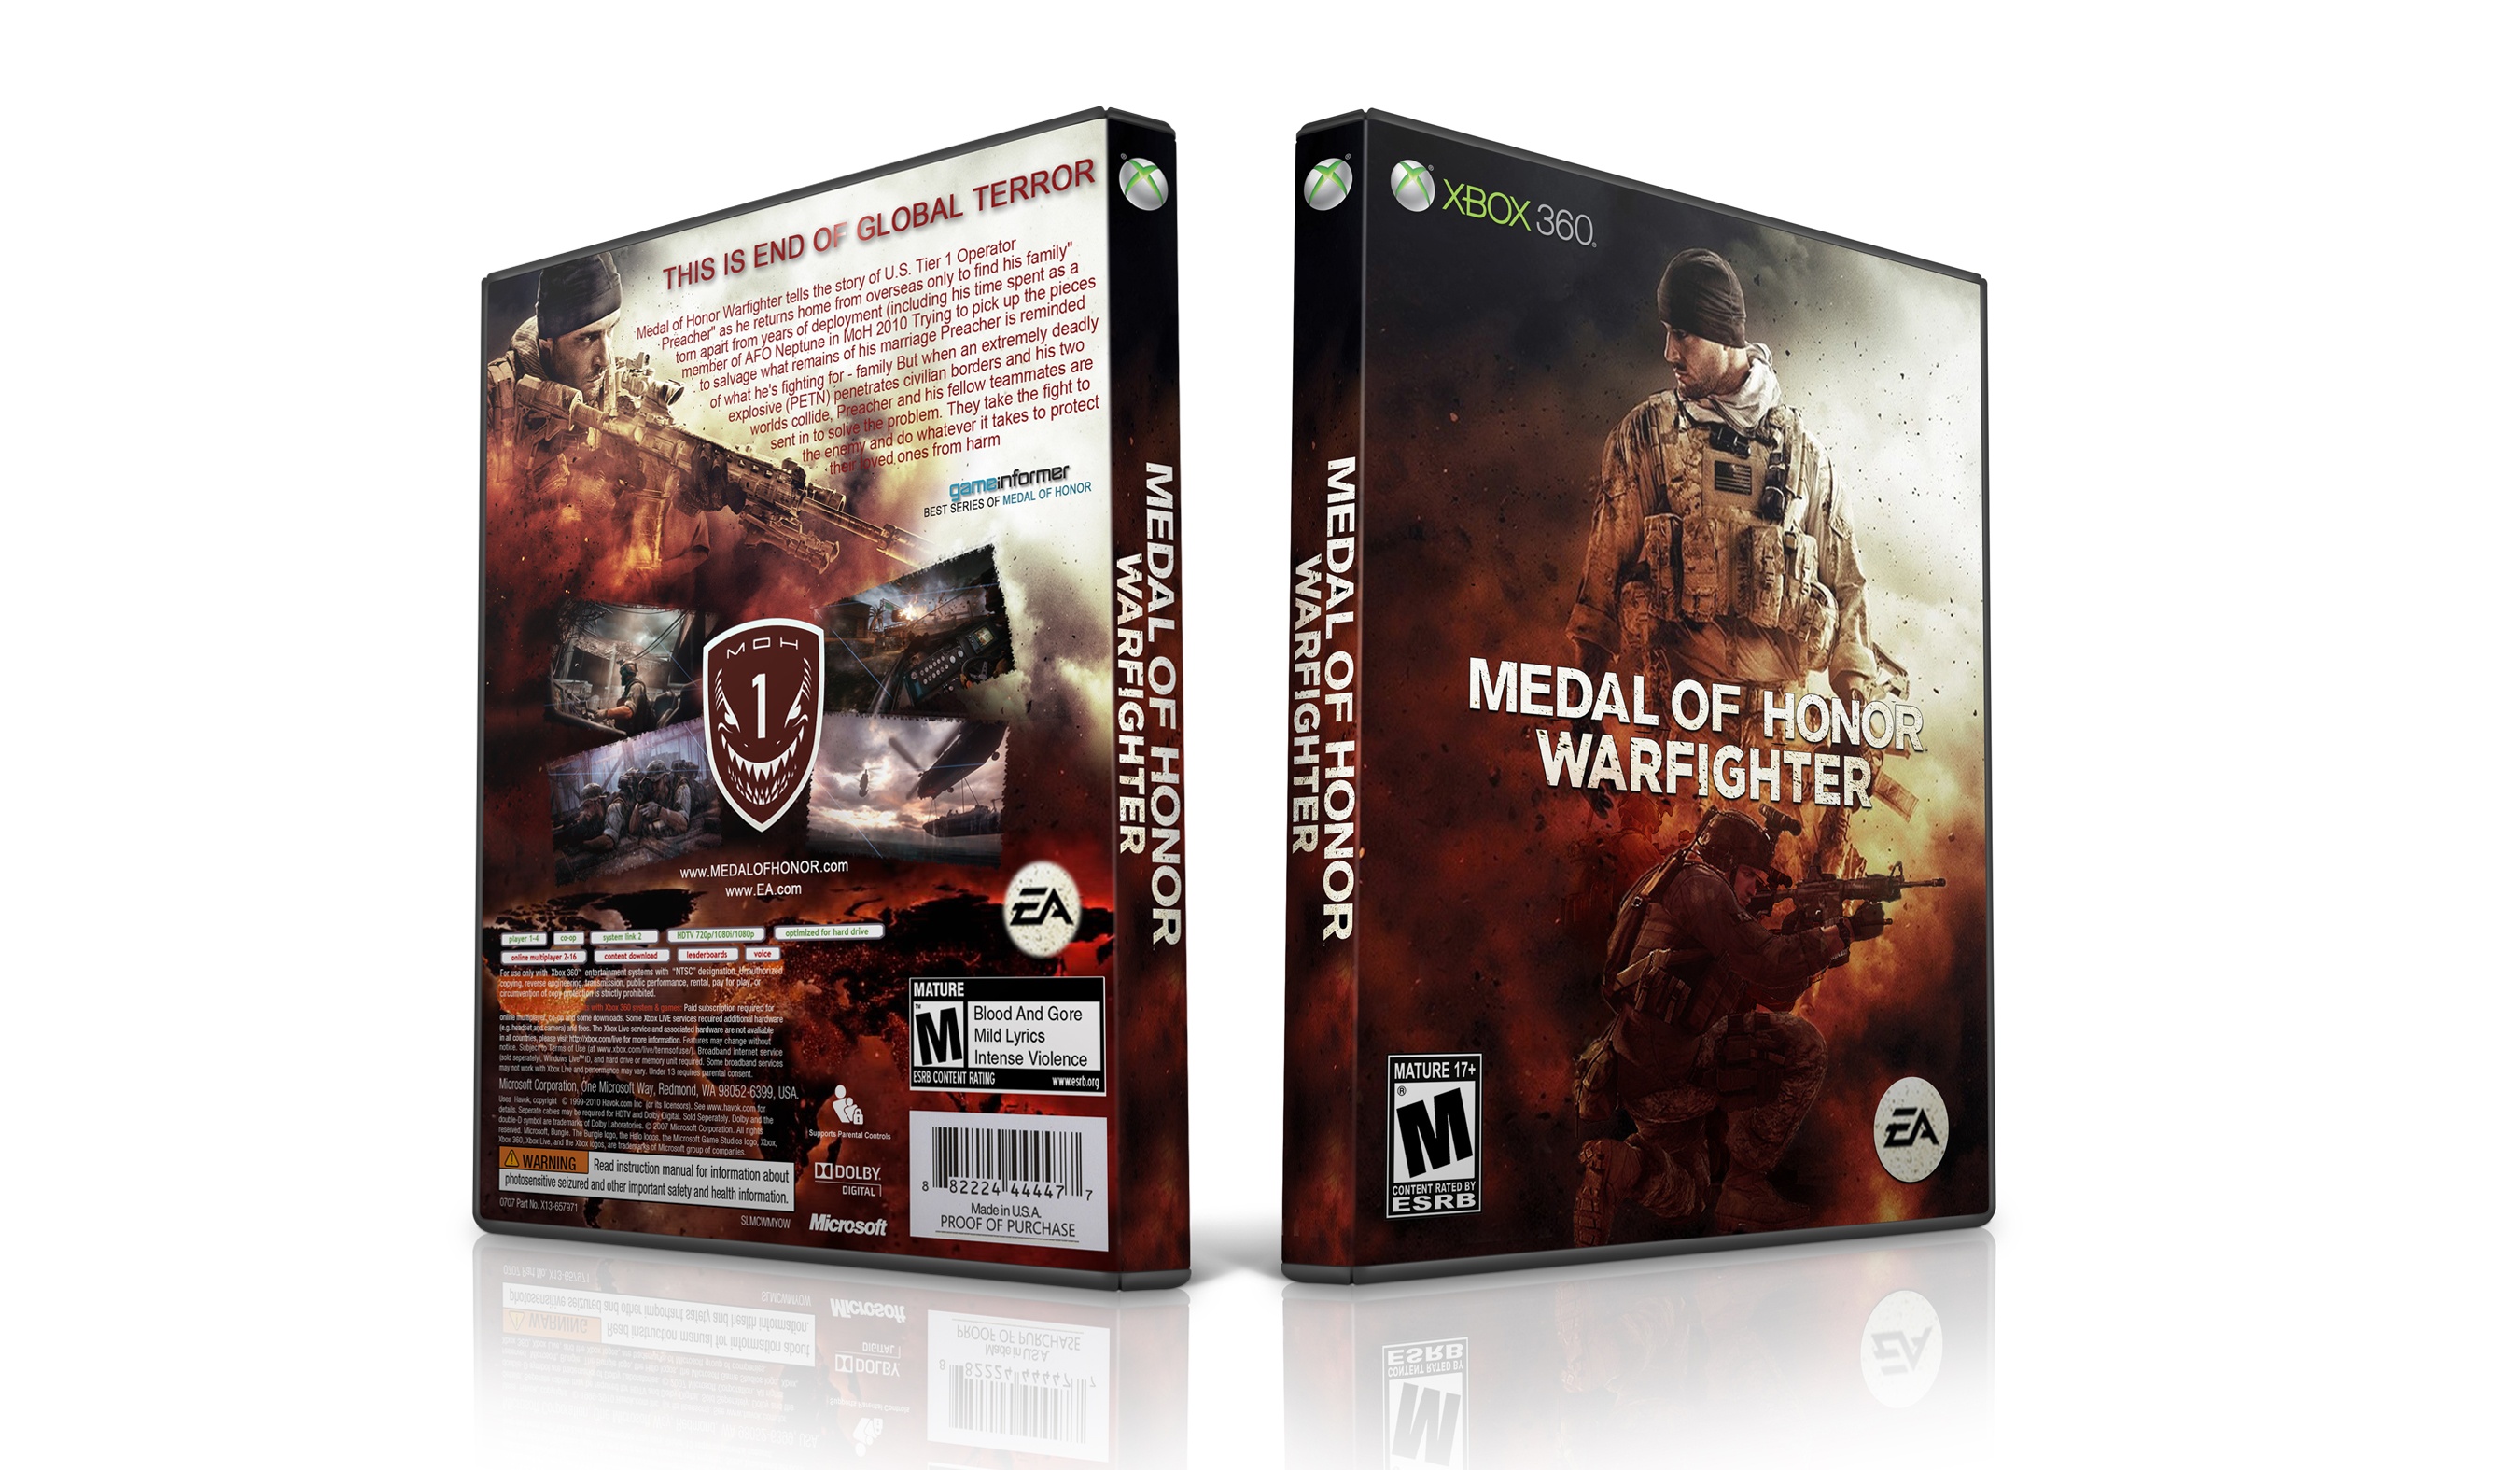 Medal of Honor Xbox 360. Medal of Honor Warfighter Xbox 360 Disk. Medal of honor трейнер